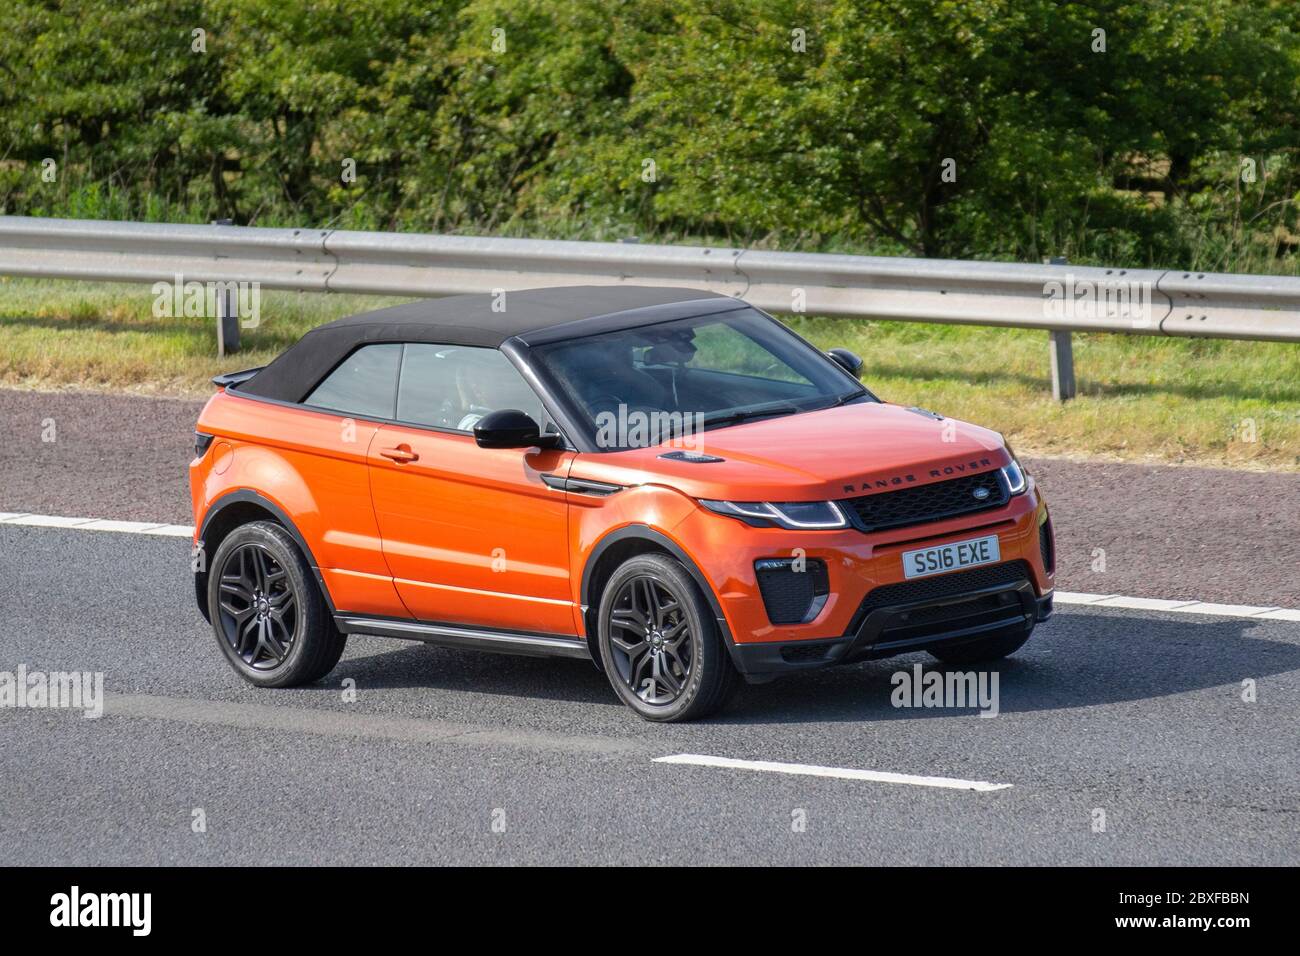 2016 orange Land Rover R Rover Evoque HSE DYN TD; Vehicular traffic moving vehicles, cars driving vehicle on UK roads, motors, motoring on the M6 motorway highway convertible, convertibles, soft-top, open topped, roadster, cabriolets, drop-tops Stock Photo